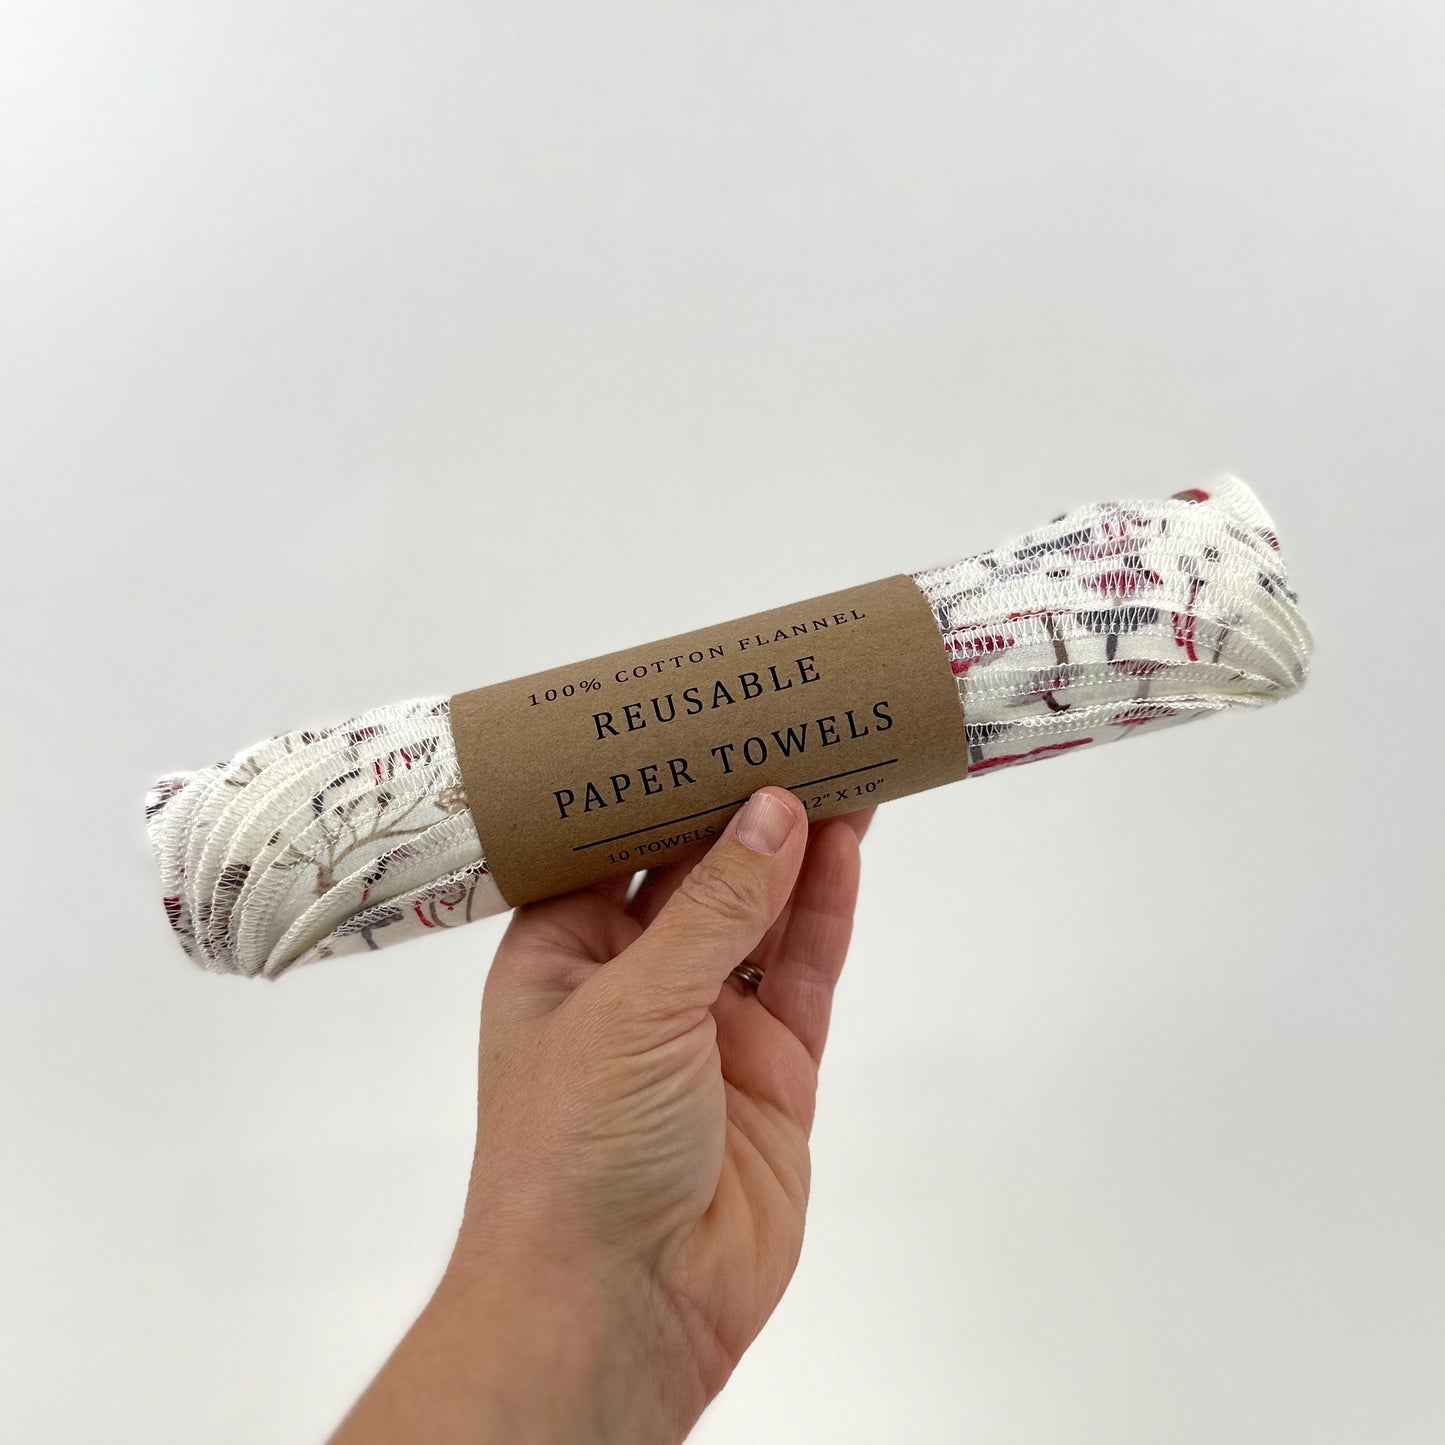 A packaged roll of felt reusable paper towels with a printed pattern of blue and red mushrooms on a natural white background - part of the Miche Niche Reusable Paper Towel collection